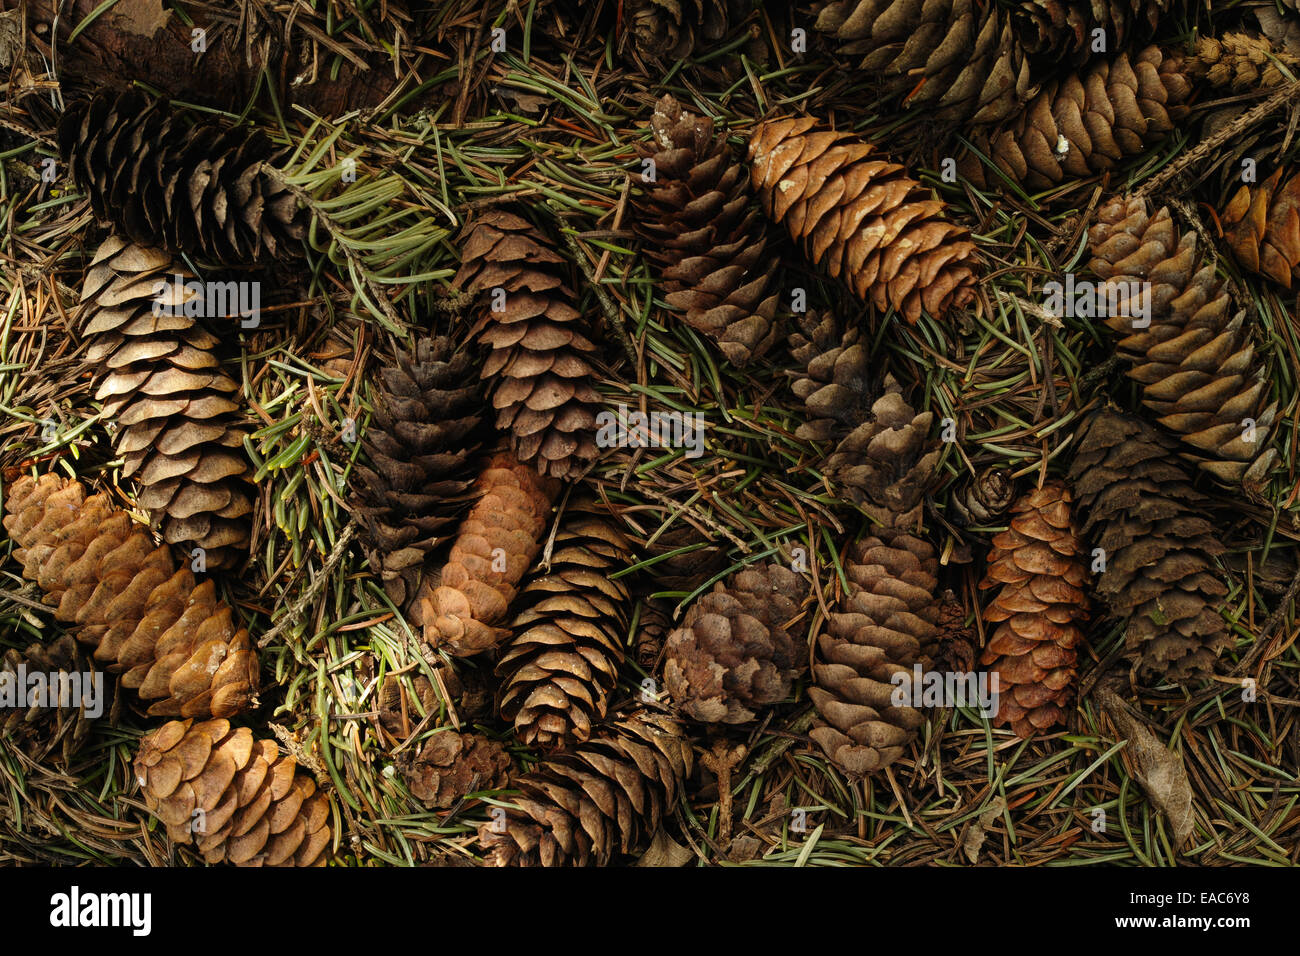 Spruce cones lying on the forest floor will grow to beautiful large spruce trees one day. Stock Photo